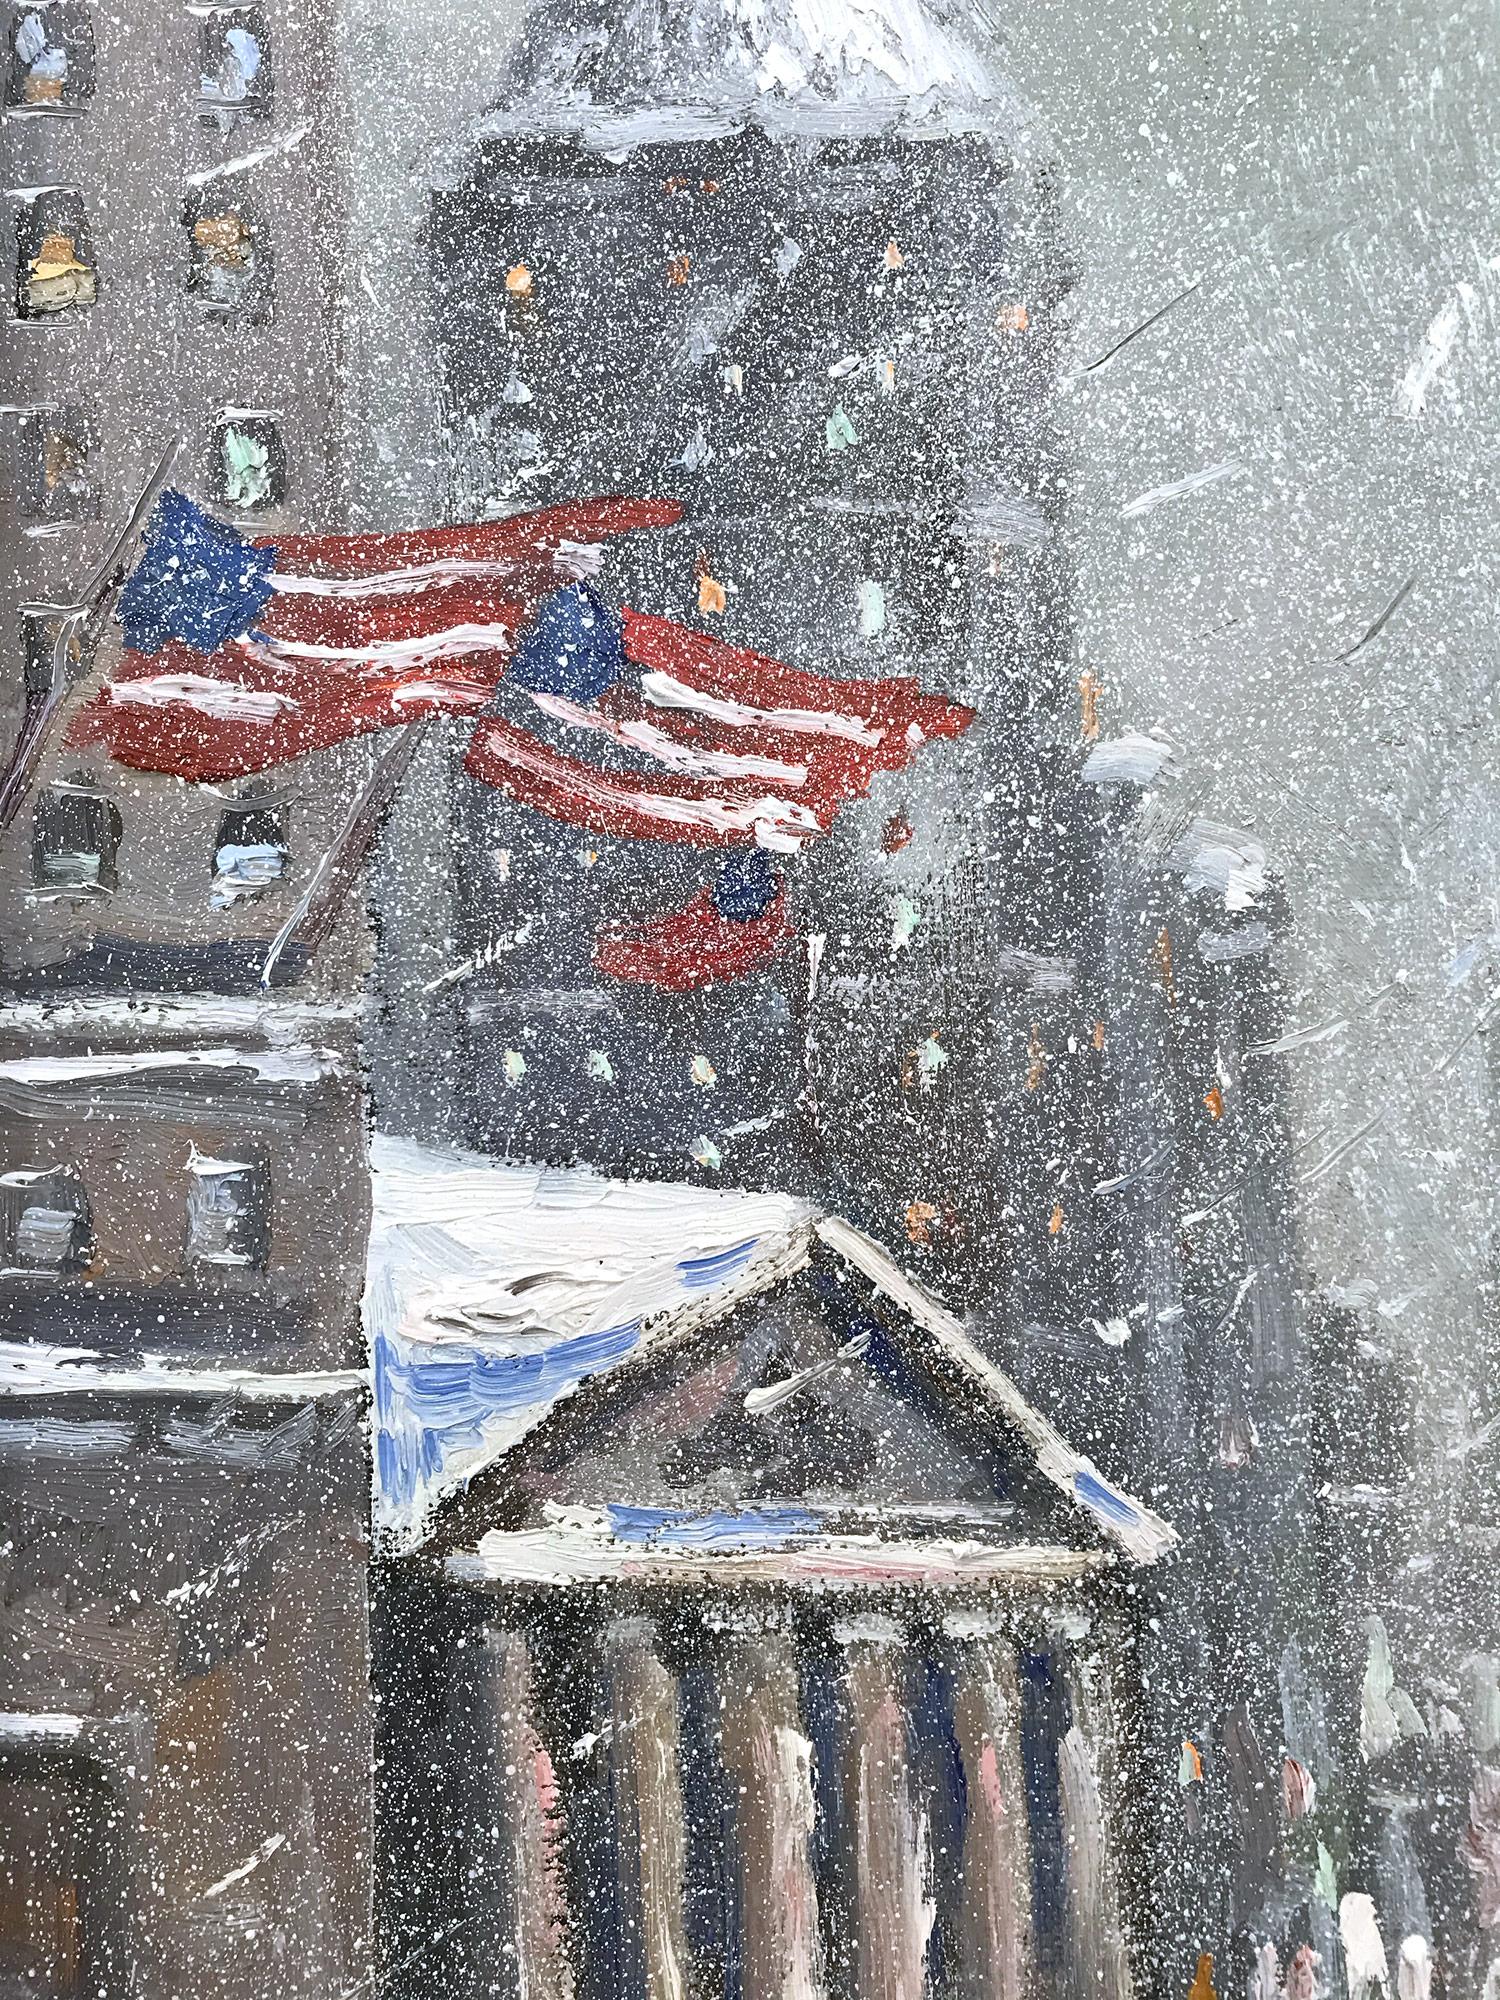 Impressionist New York City winter city-scene depicting Wall Street and Broad with American flags, cars and pedestrians in a most intimate, yet energetic way. Christopher is known for capturing the beauty and simplicity of an earlier time of the